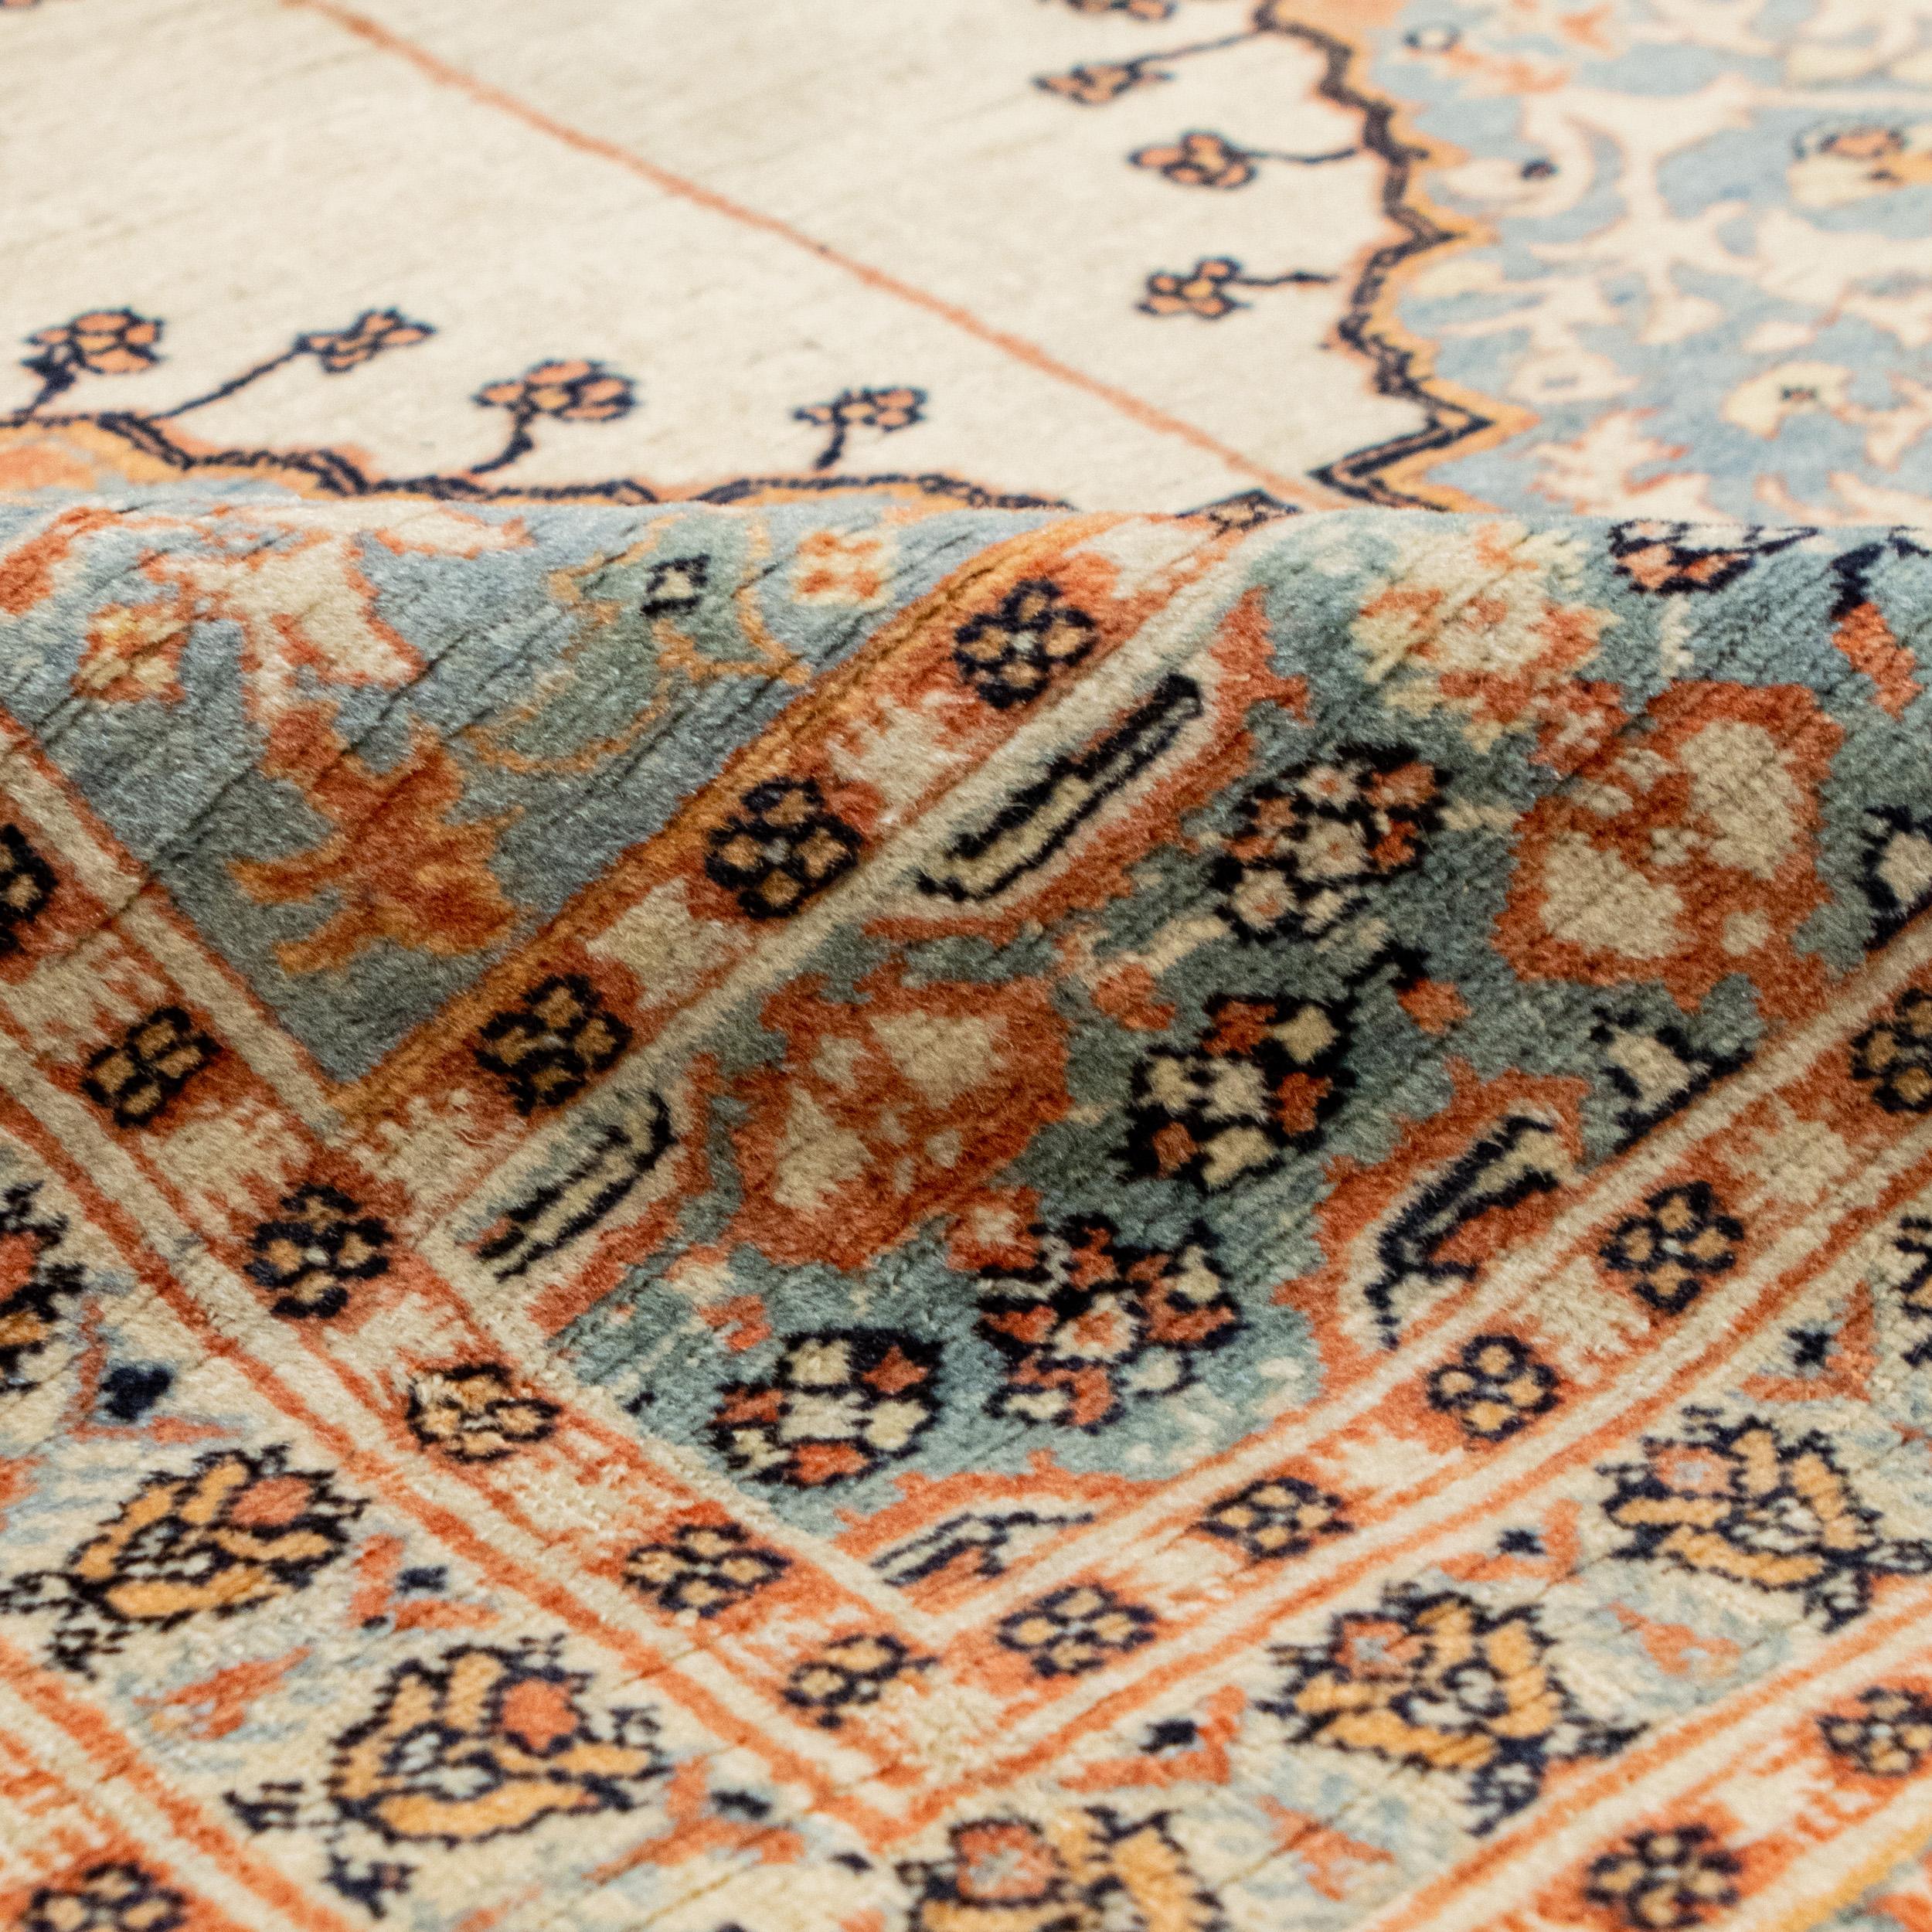 An antique Persian fine Tabriz rug in the size of 3'9